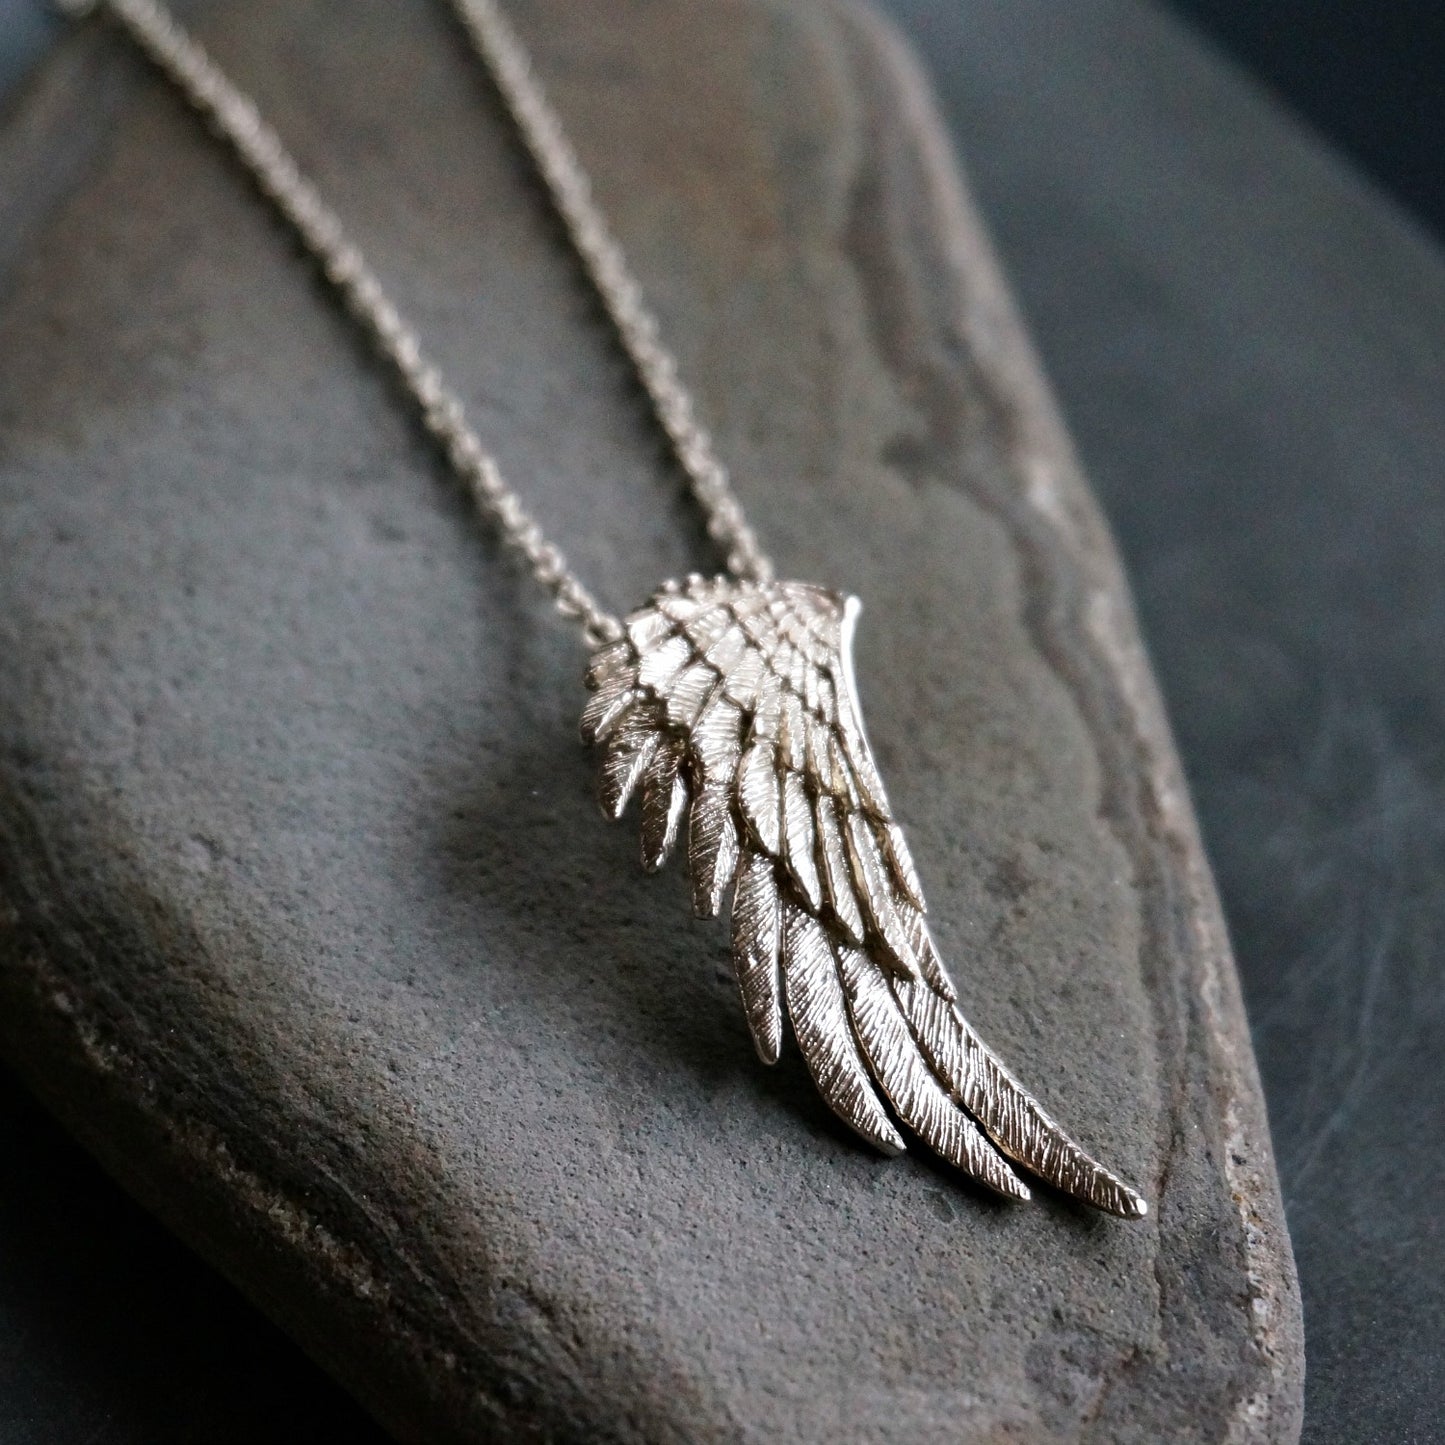 Load image into Gallery viewer, Icarus Wing Pendant - SOWELL JEWELRY
